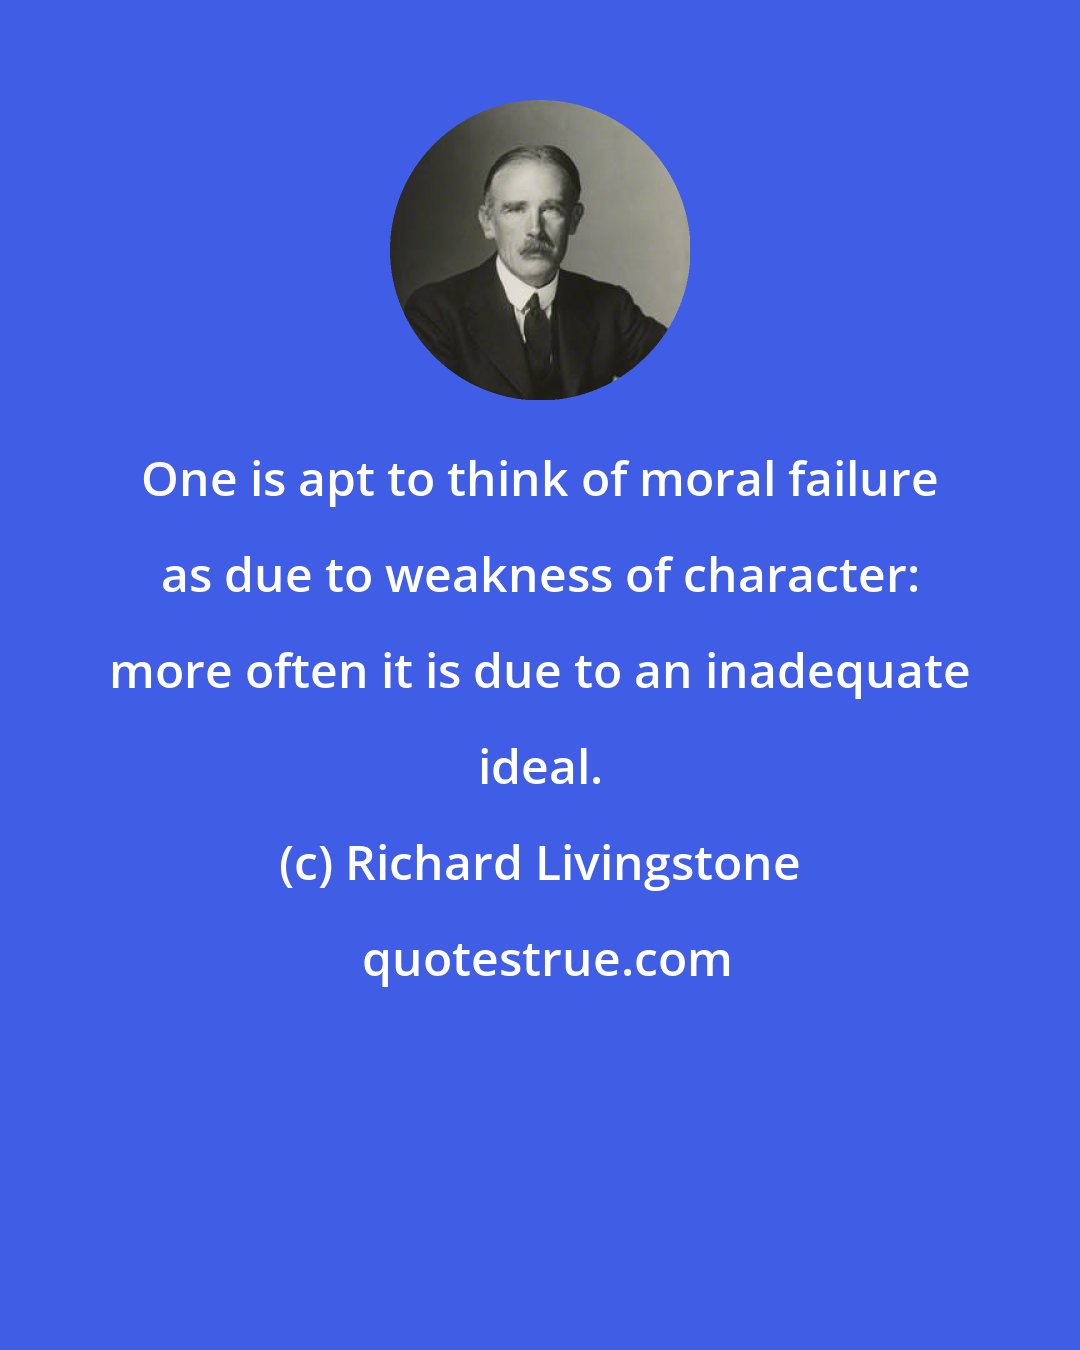 Richard Livingstone: One is apt to think of moral failure as due to weakness of character: more often it is due to an inadequate ideal.